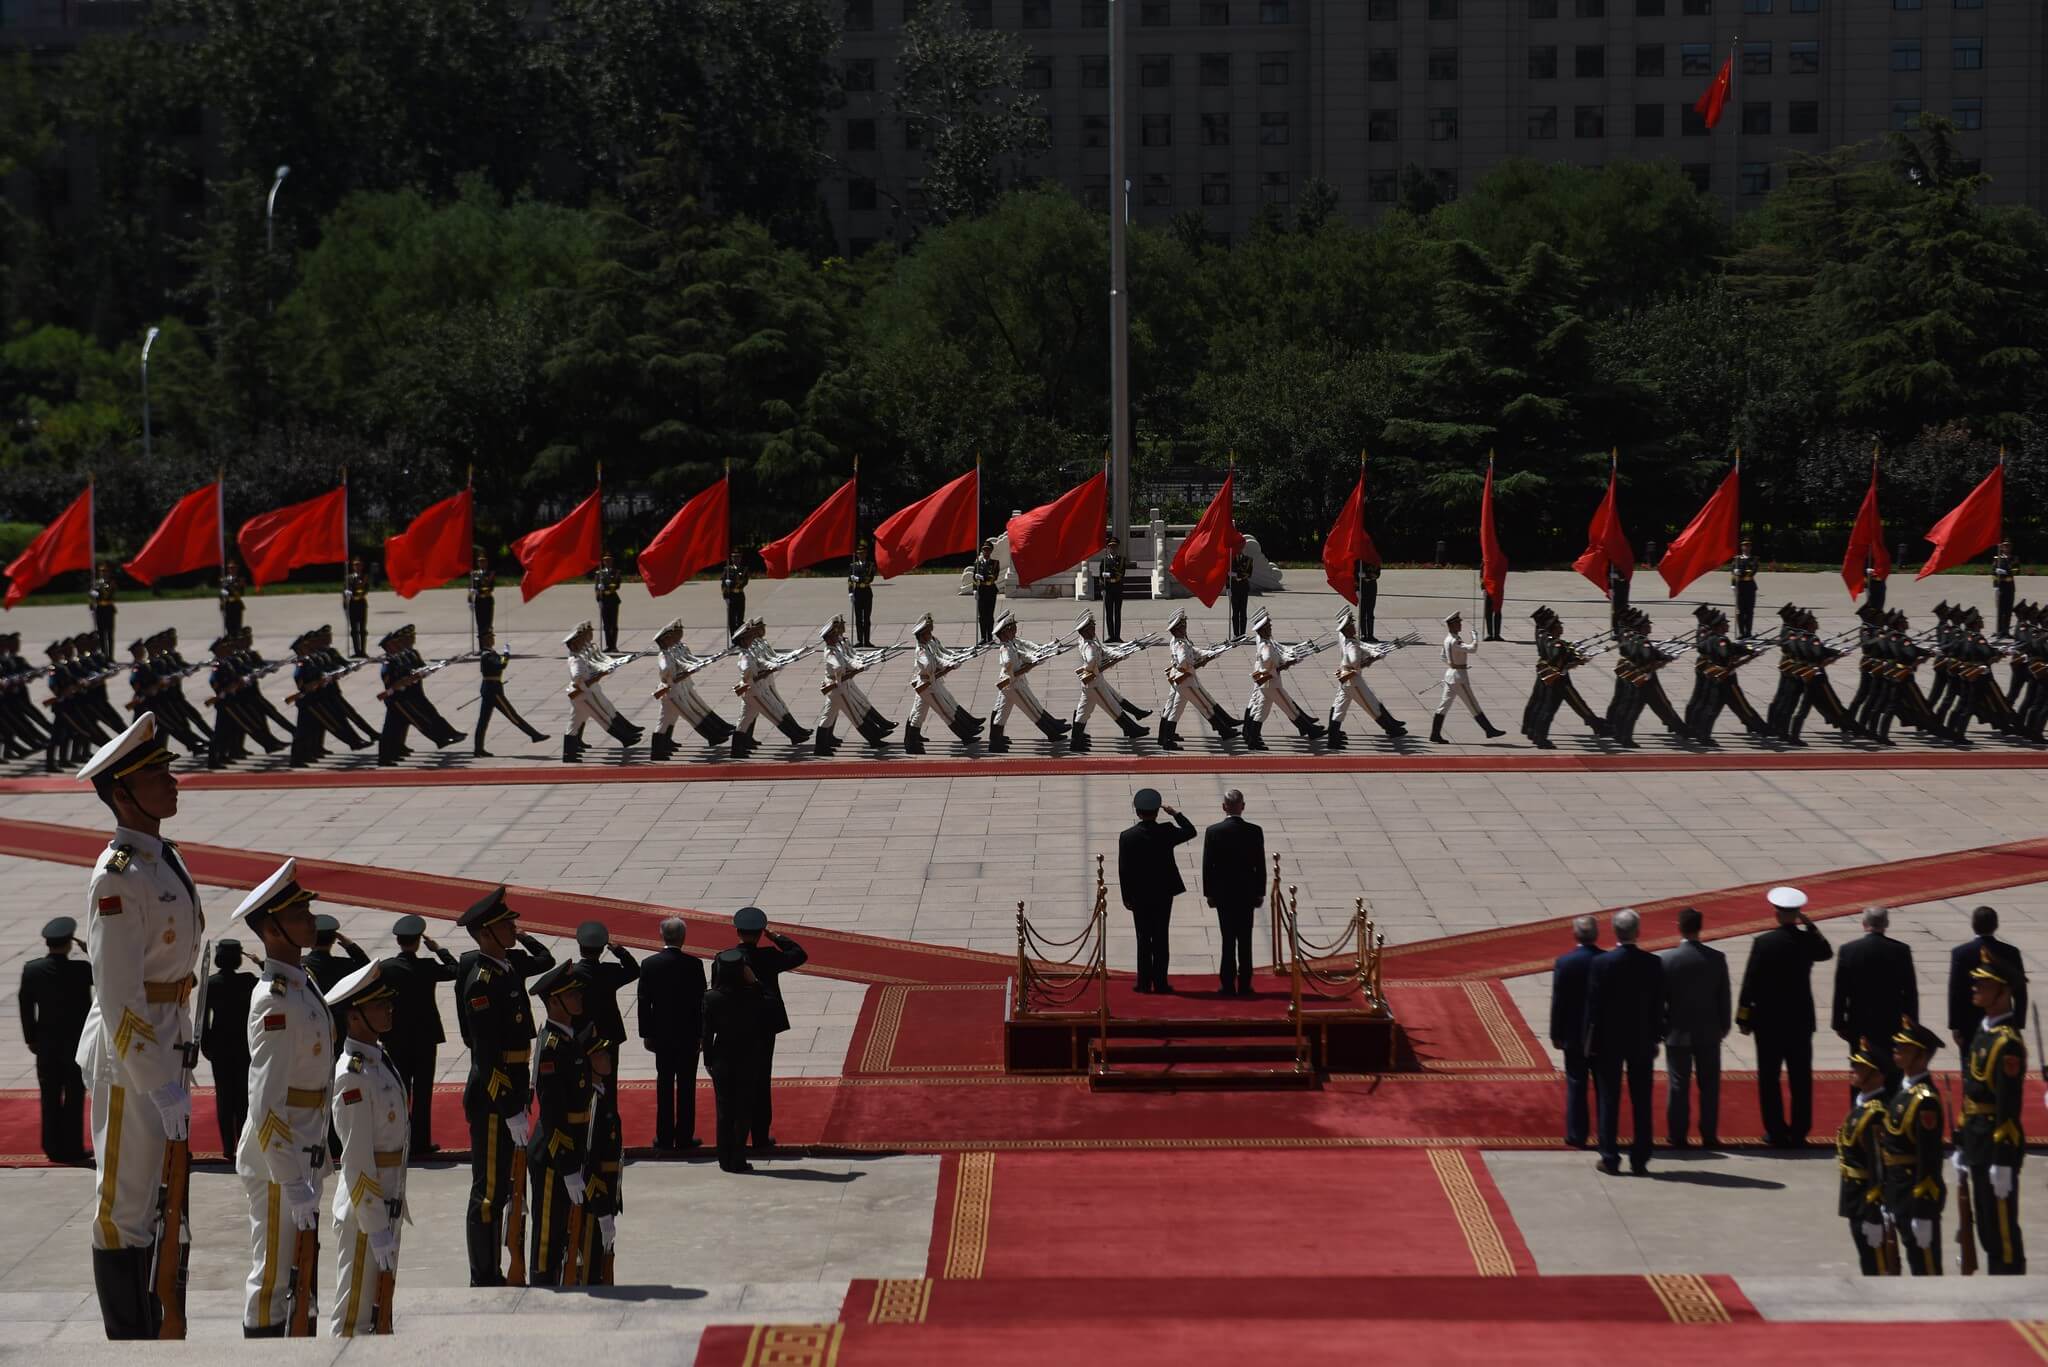 U.S. Secretary of Defense James N. Mattis meets with China’s Minister of National Defense Wei Fenghe at the Bayi Building, China’s Ministry of National Defense in Beijing, June 27, 2018. © U.S. Secretary of Defense 